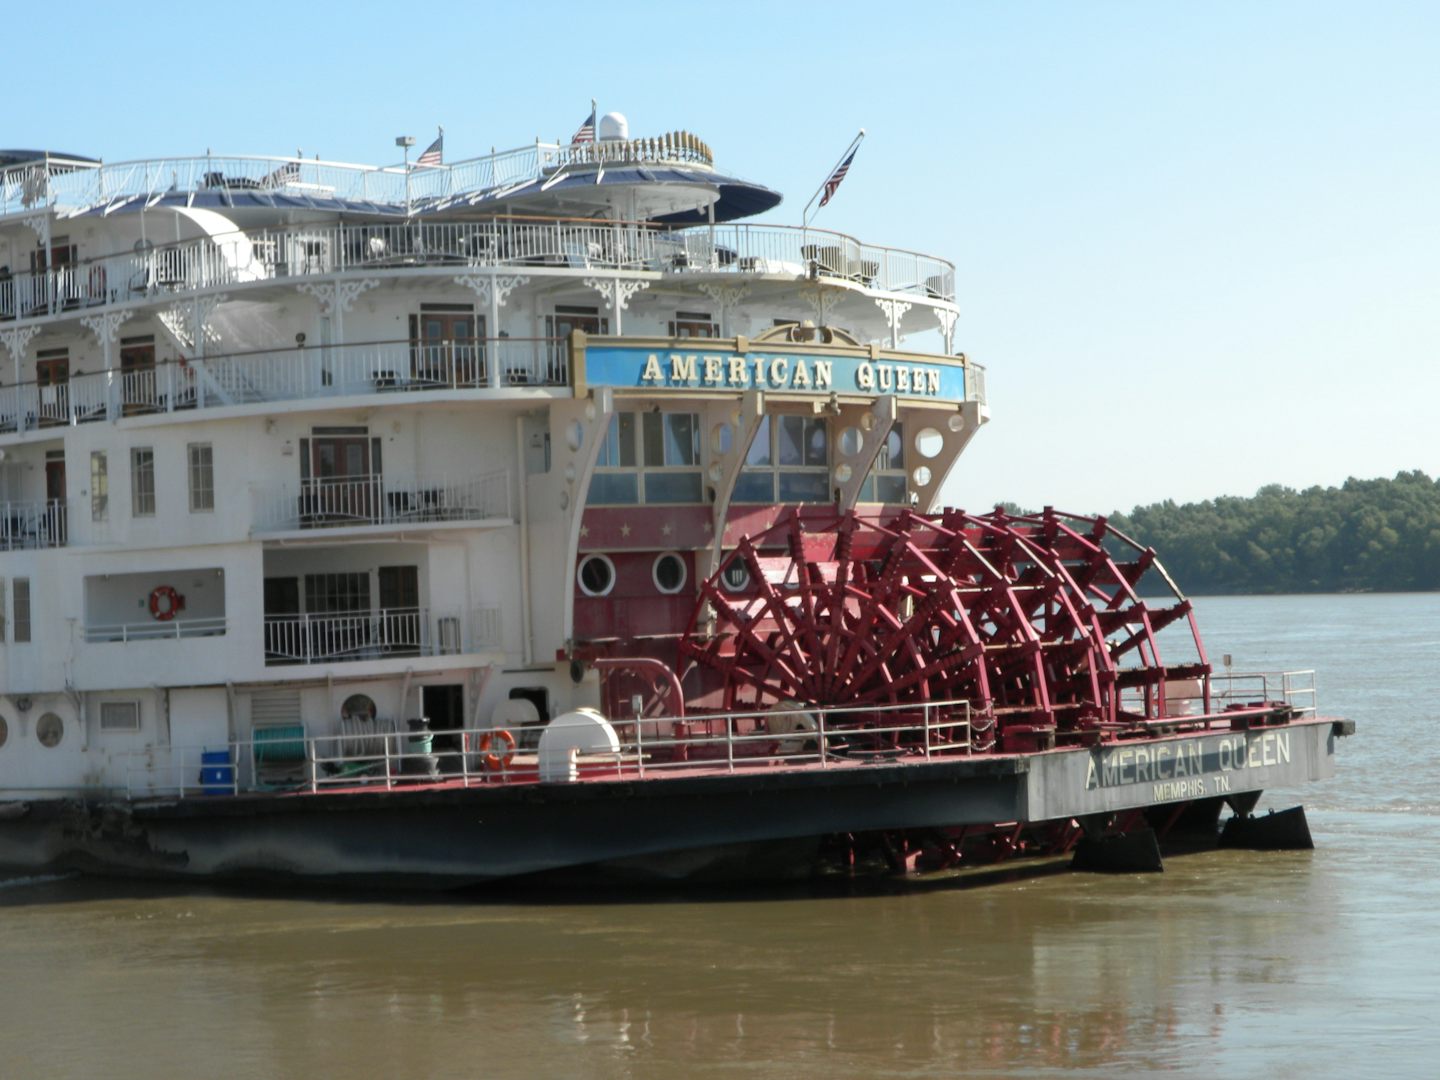 Paddle wheel view while docked in Cape Girardeau, MO